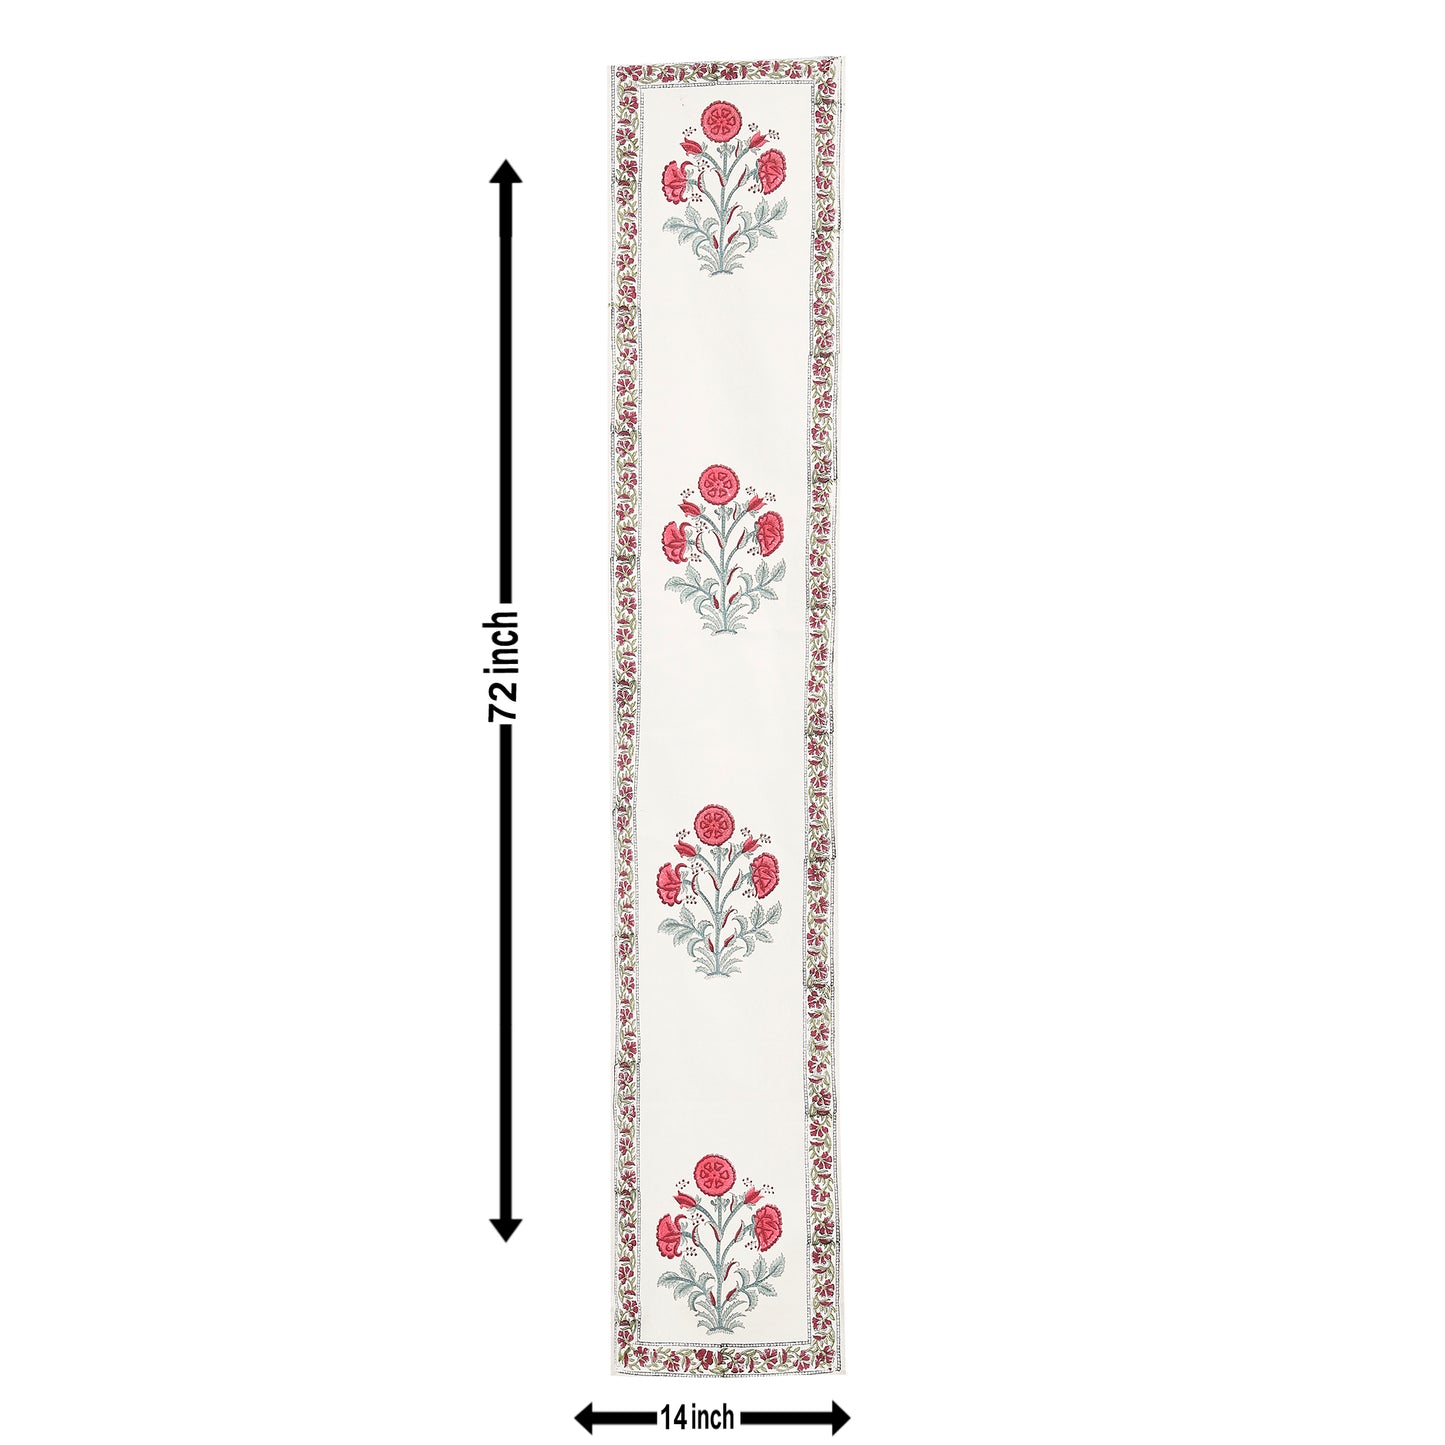 Hand Block Printed Canvas Cotton Cloth Table Runner - Red Floral